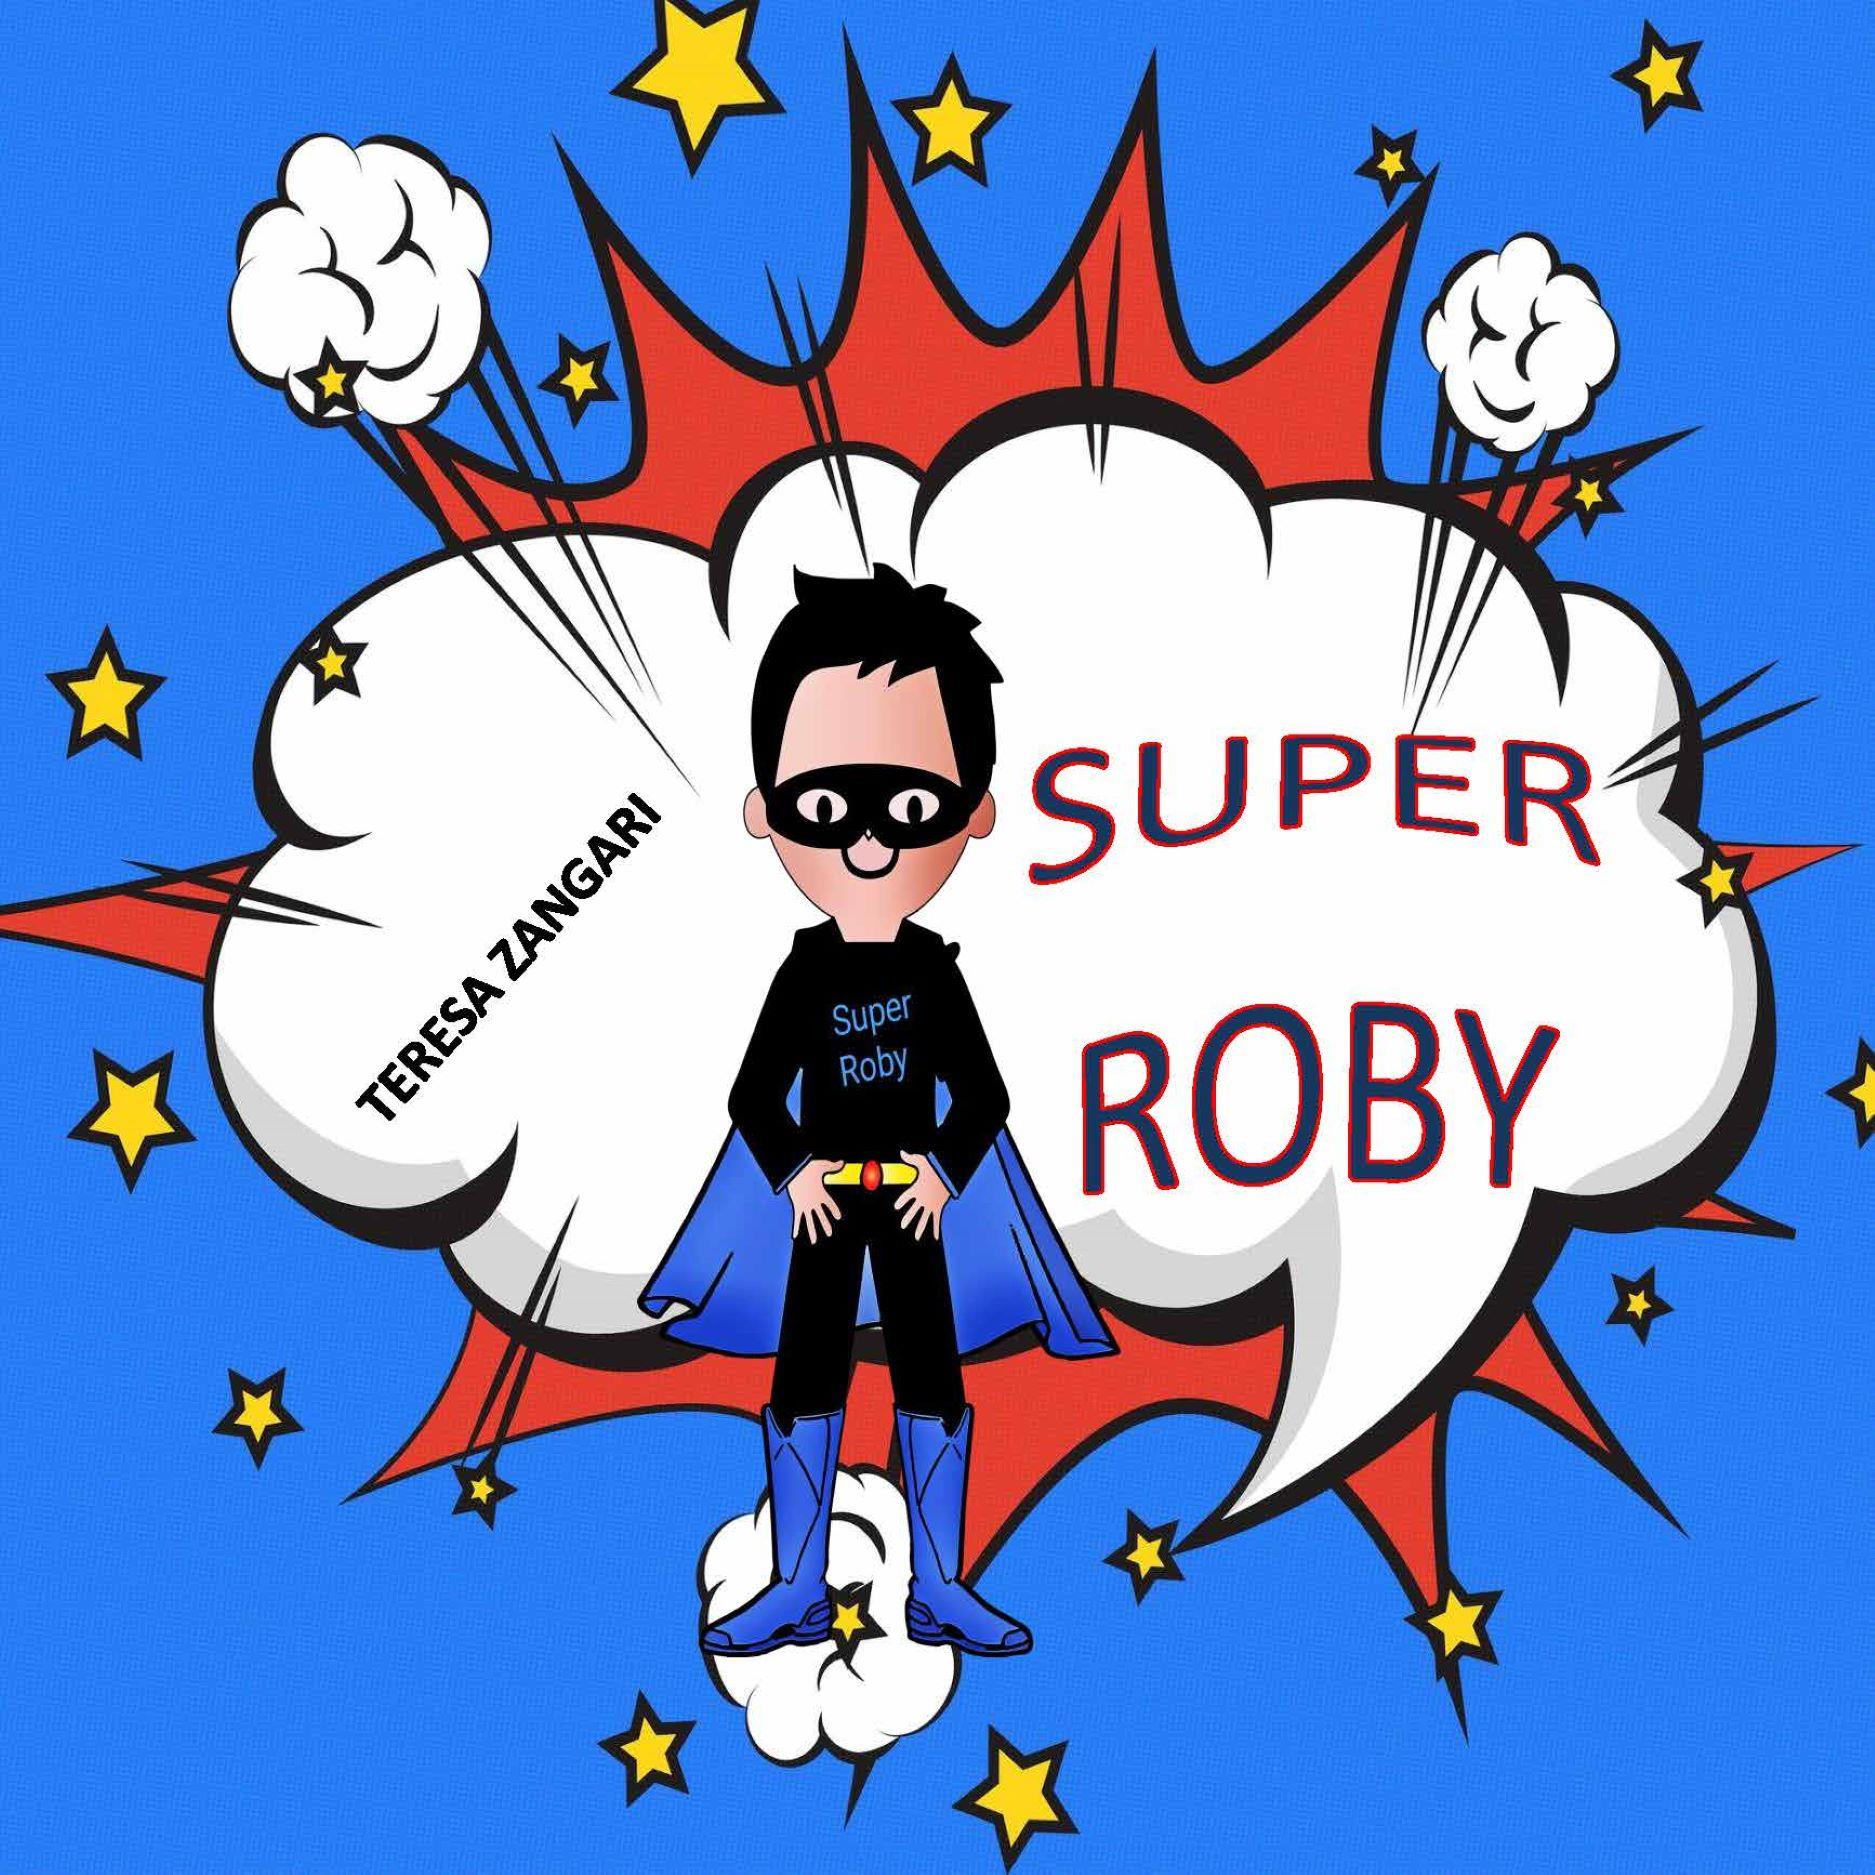 Super Roby